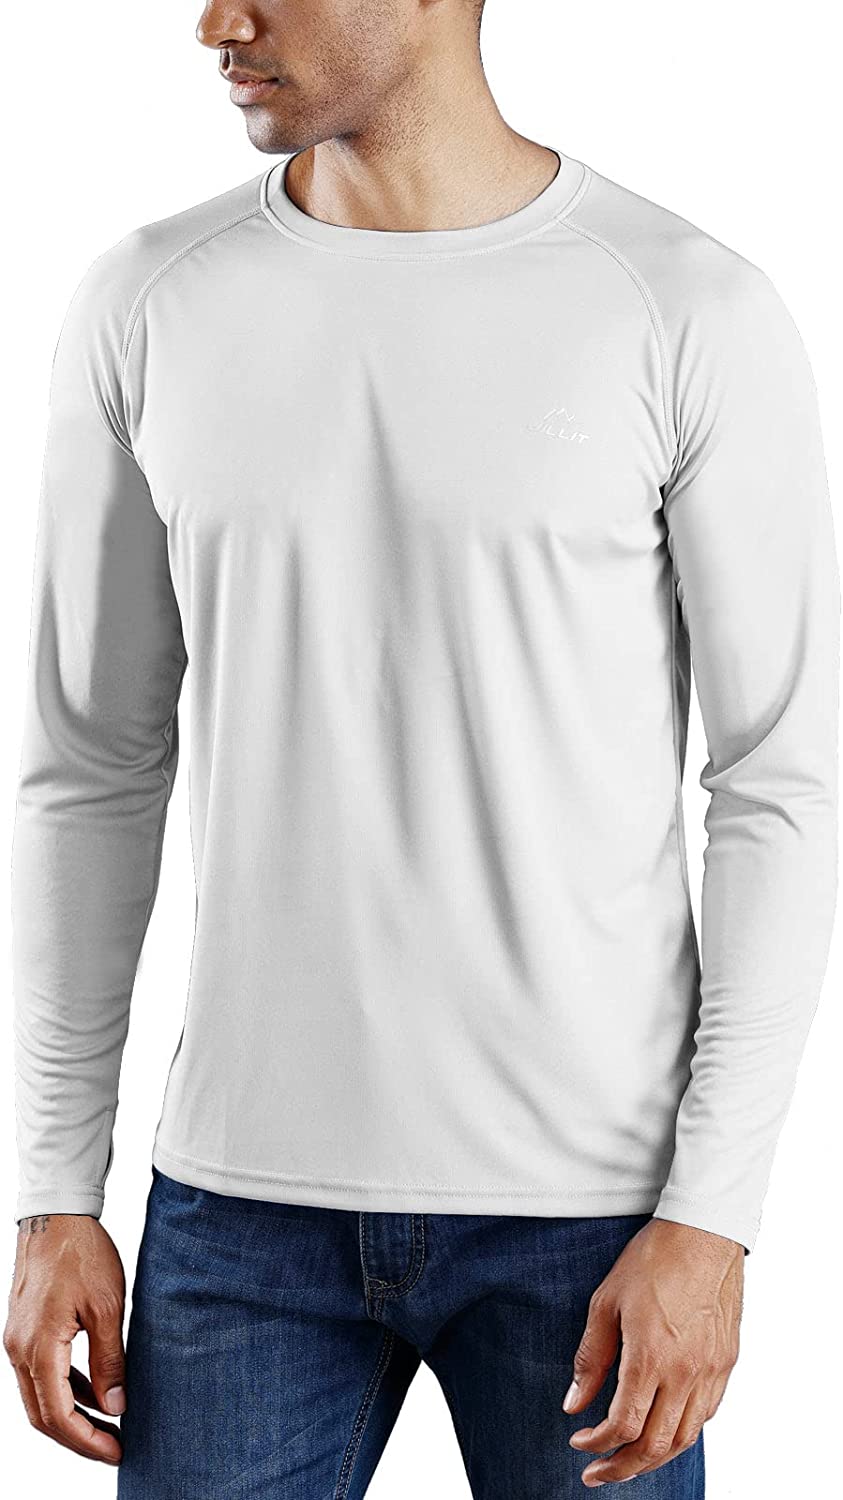 Willit Men's Sun Protection Long Sleeve Running Shirts with Pocket